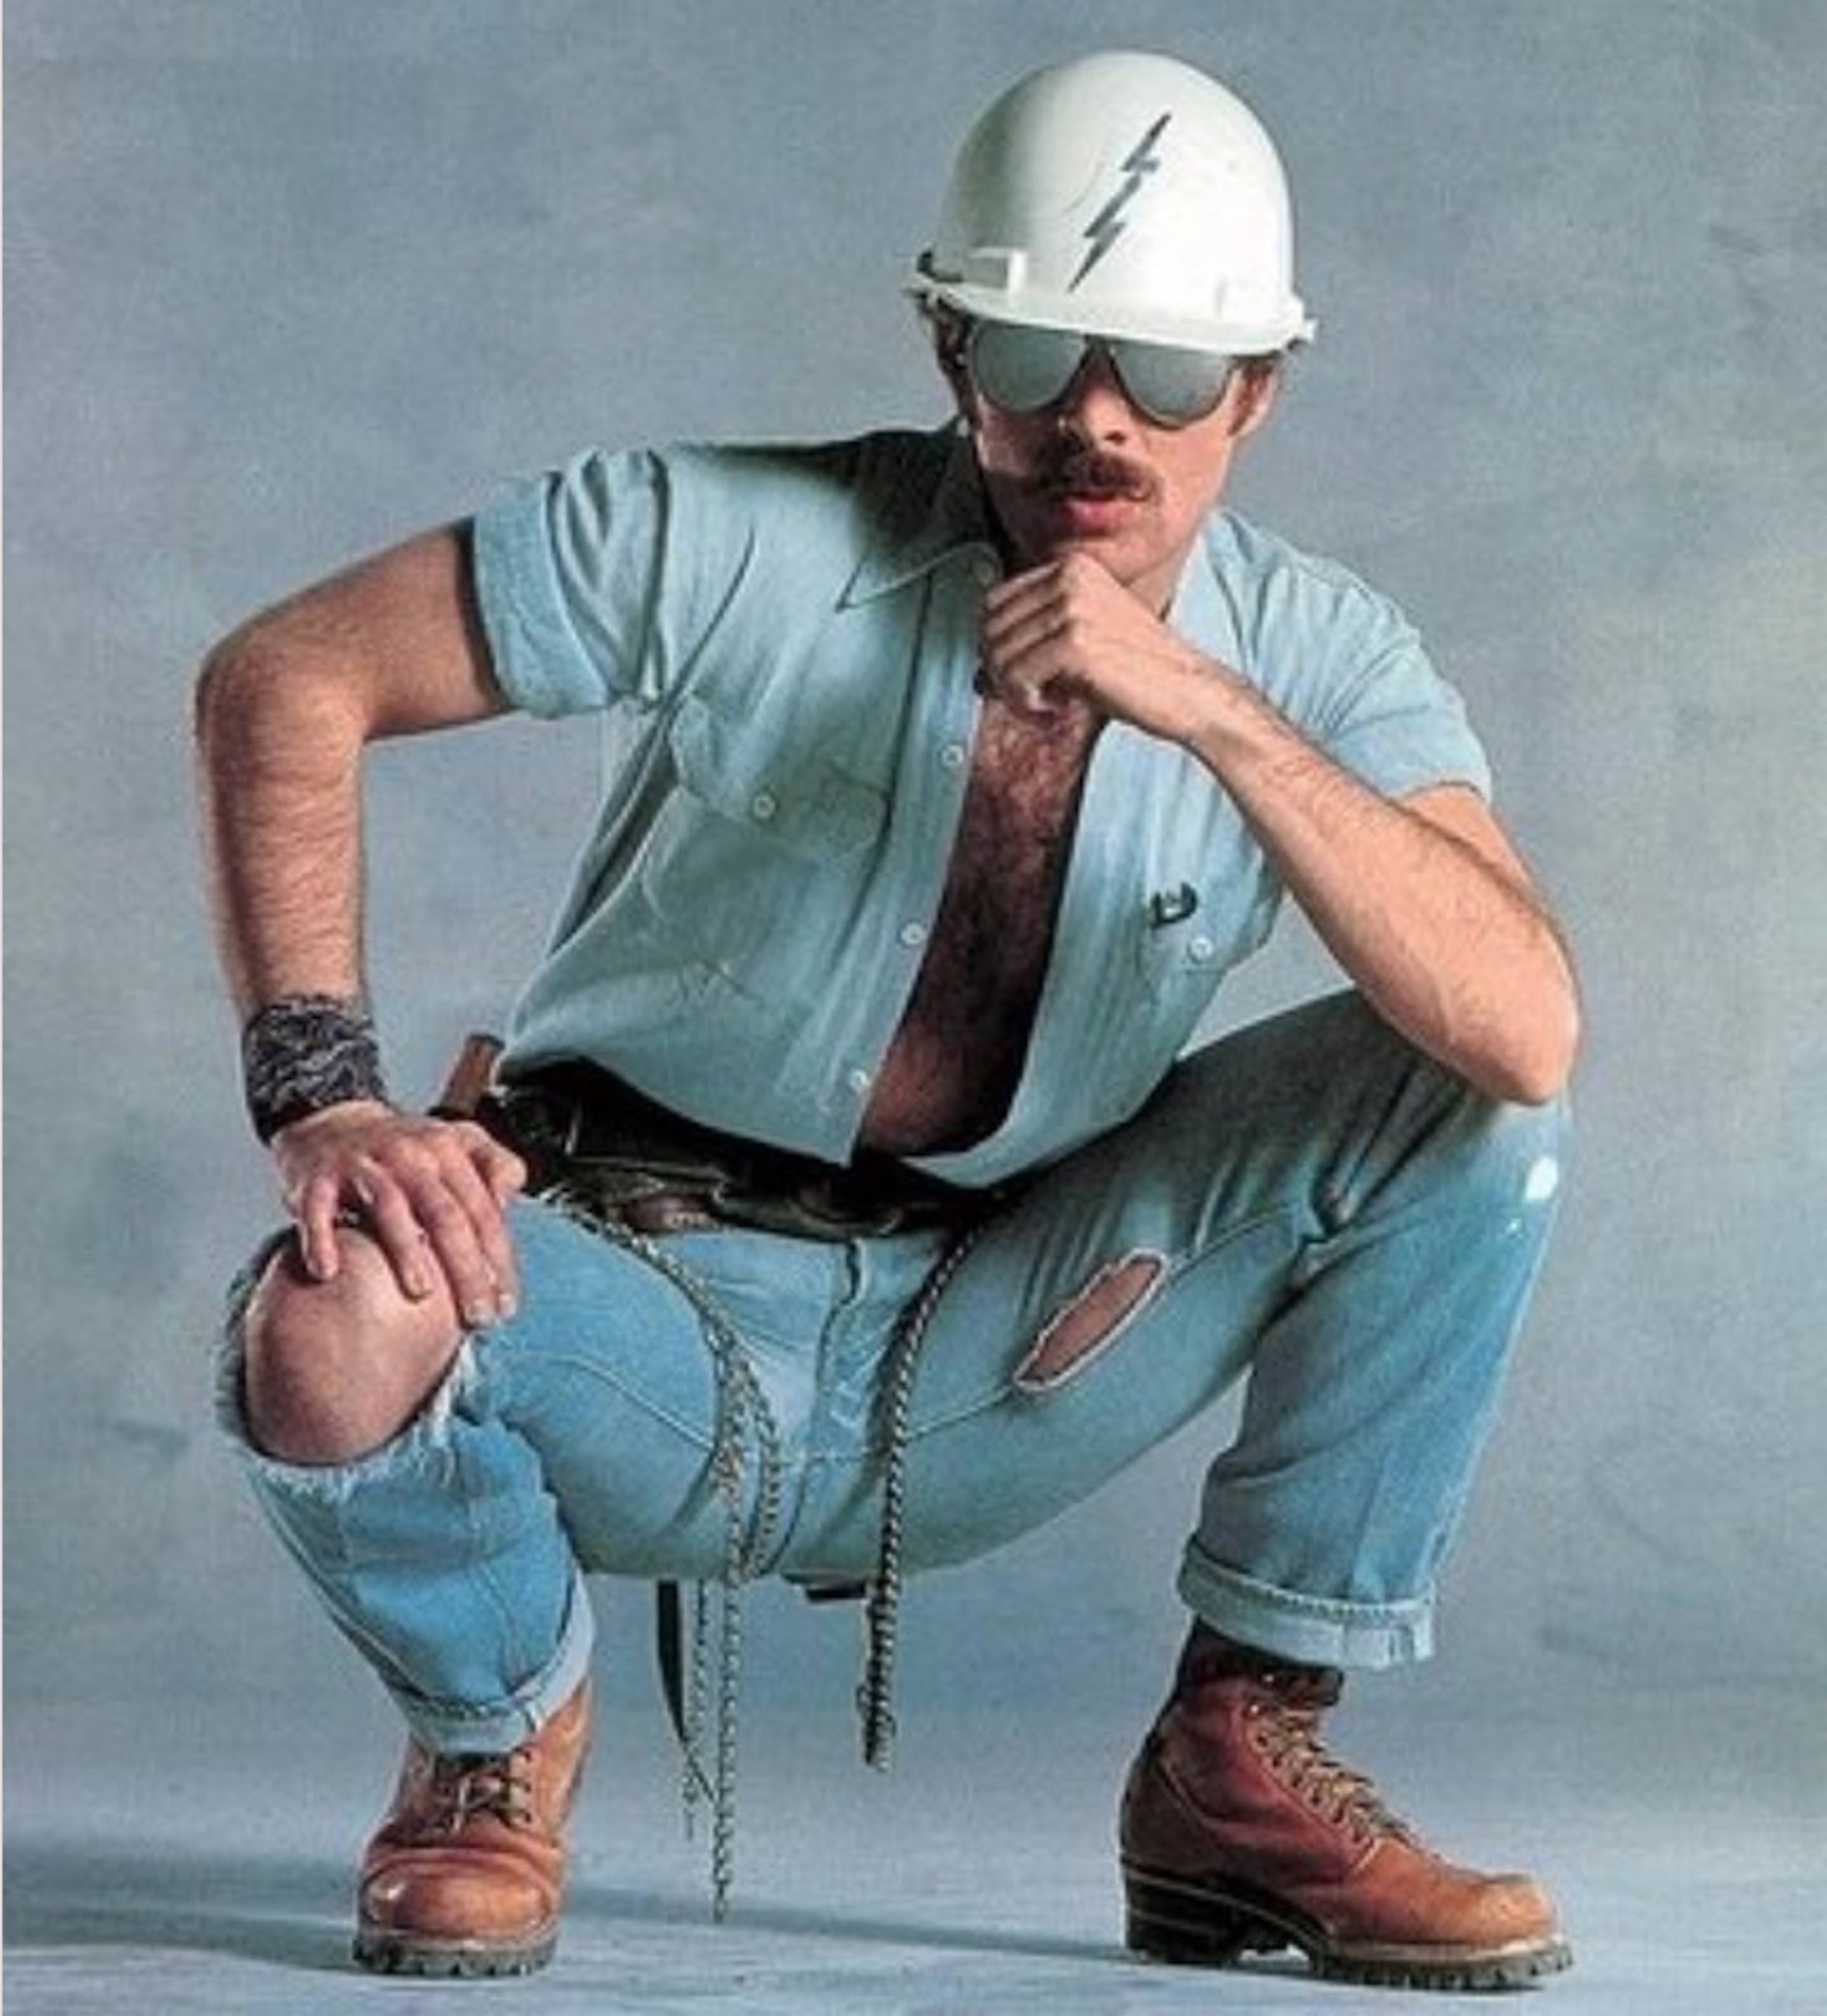 David Hodo as one of the Village People